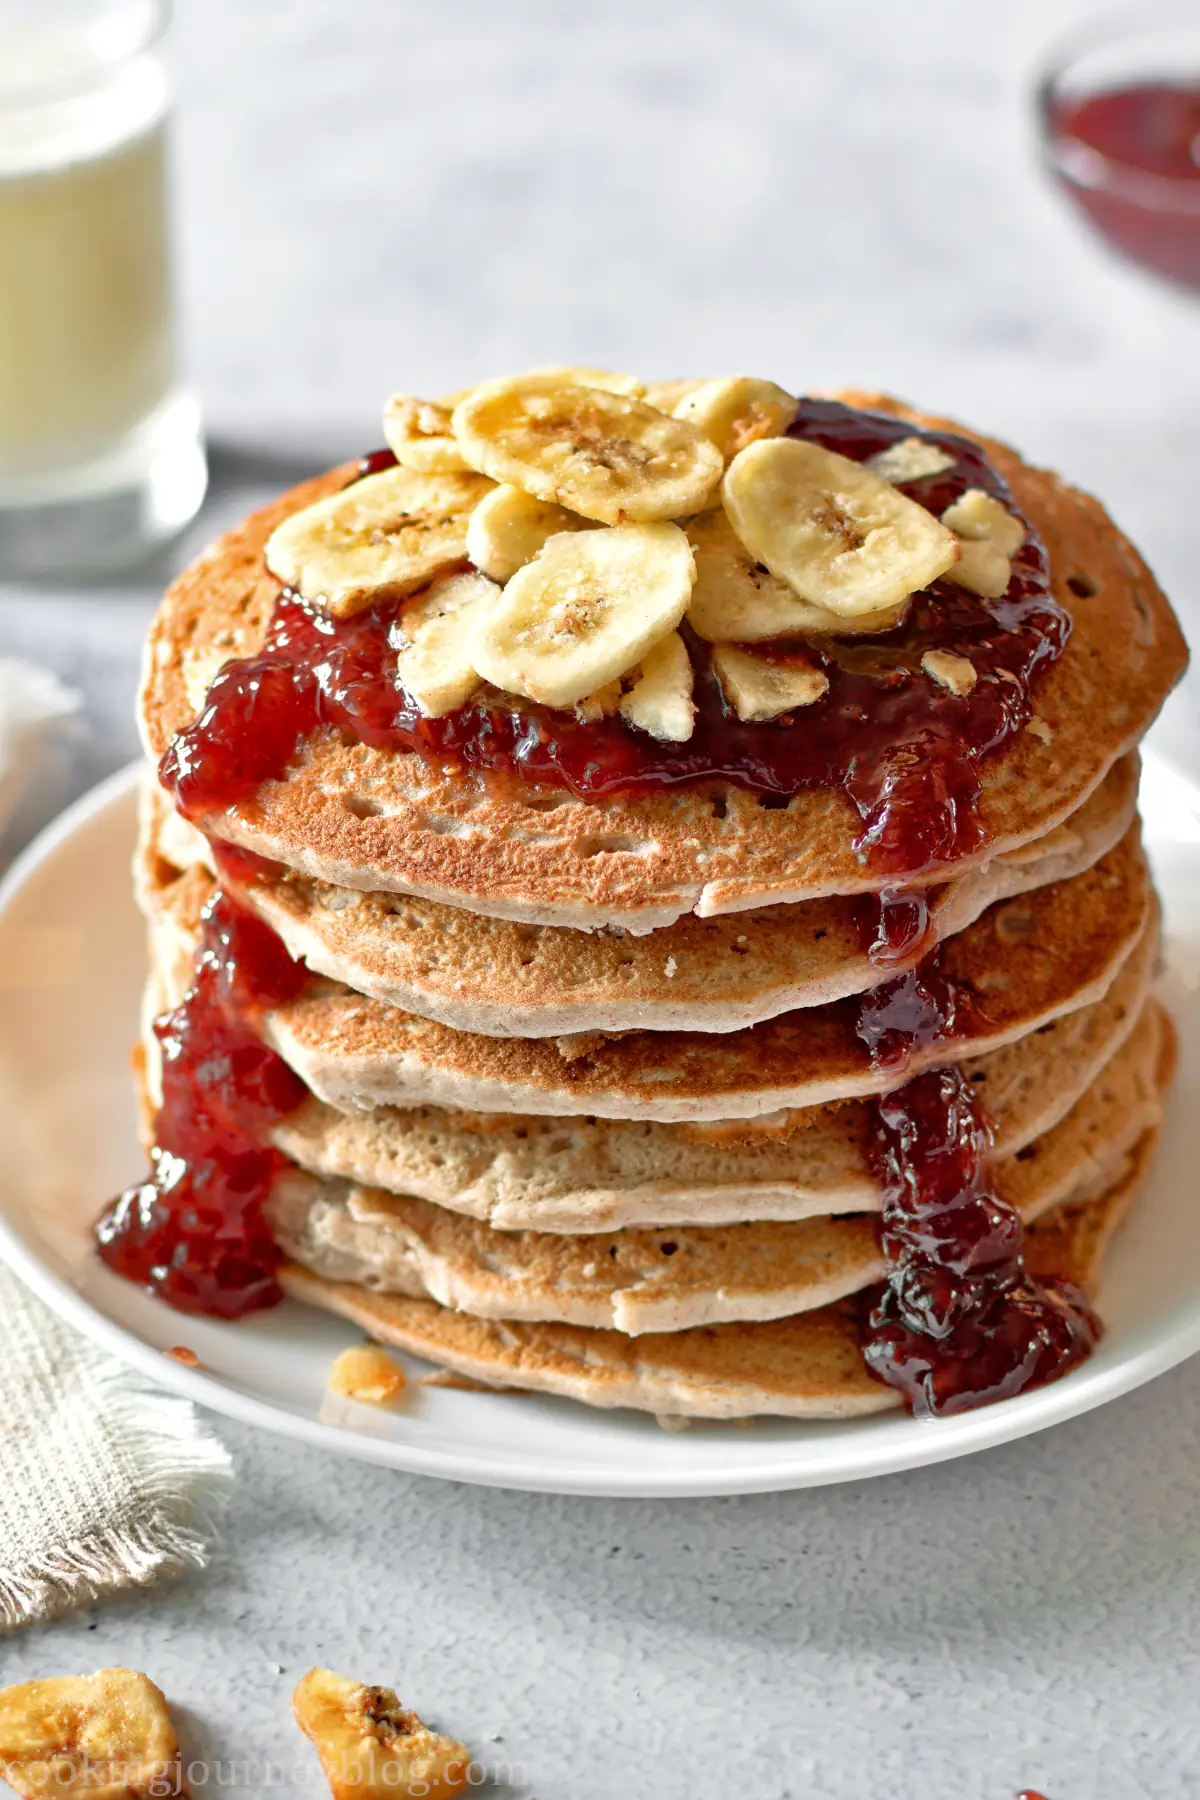 Banana Buckwheat Pancakes served with red jam and bananas on a white plate